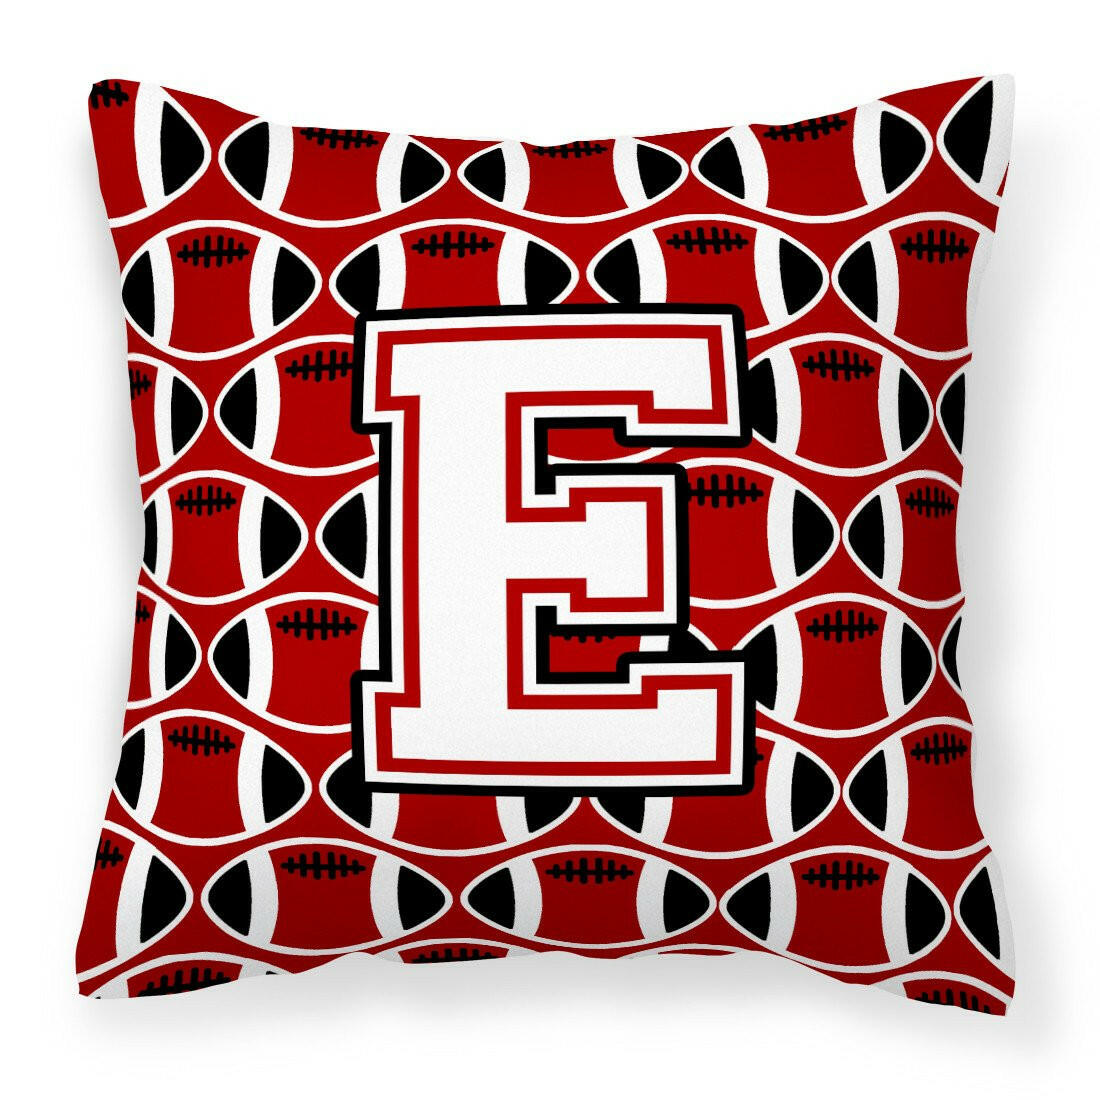 Letter E Football Cardinal and White Fabric Decorative Pillow CJ1082-EPW1414 by Caroline's Treasures